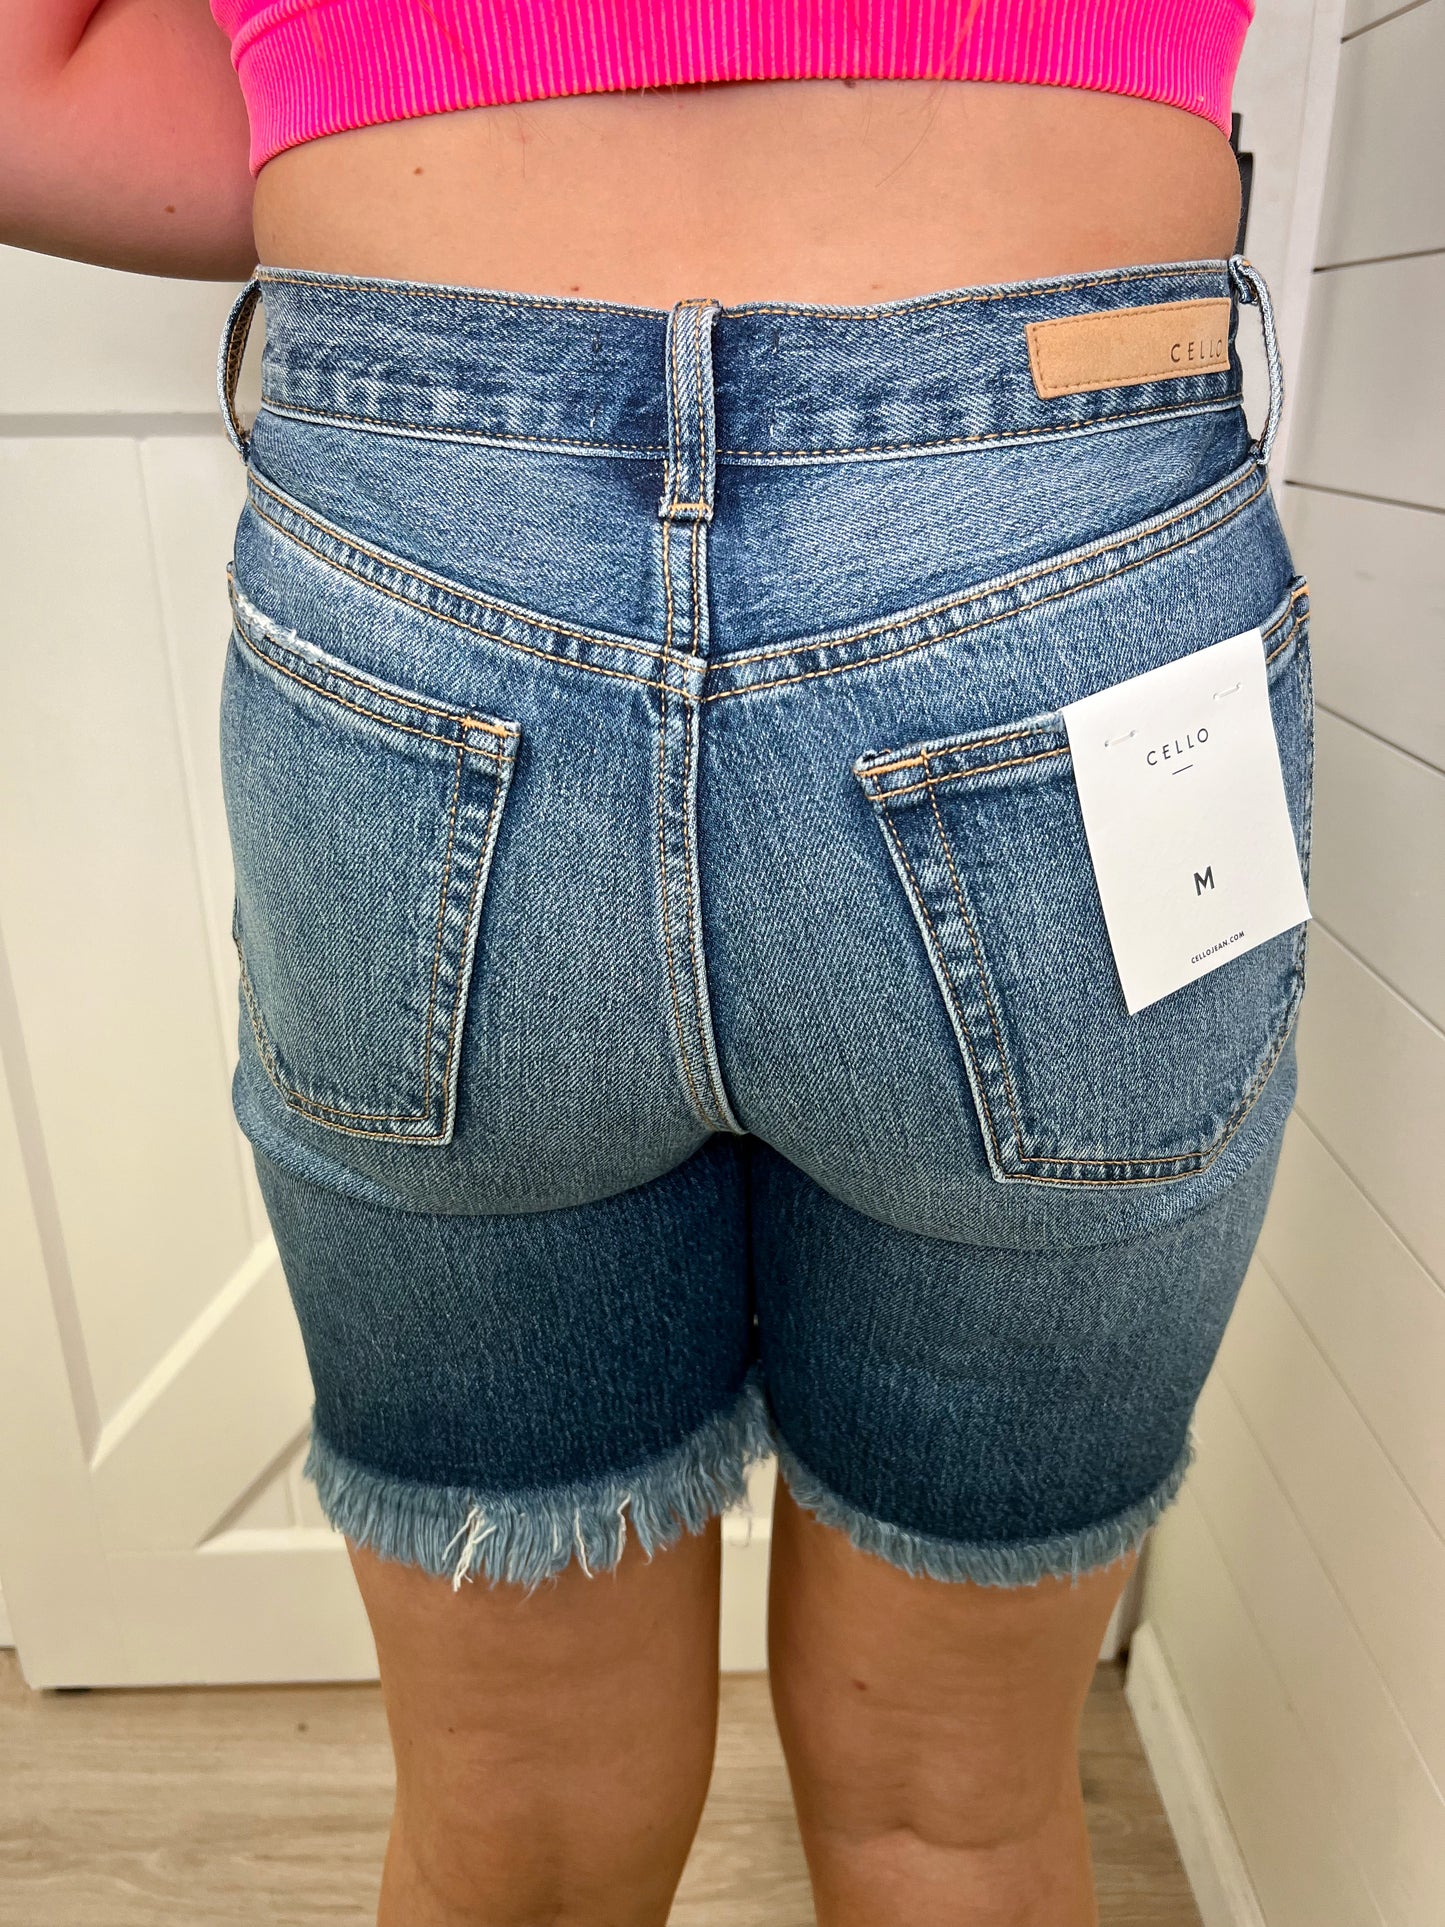 Claudie High Rise Frayed Hem Bermuda Shorts-Shorts-cello-09/06/23, 1st md, 2nd md, 8/09/23 md, FAVES, ST 99-The Twisted Chandelier